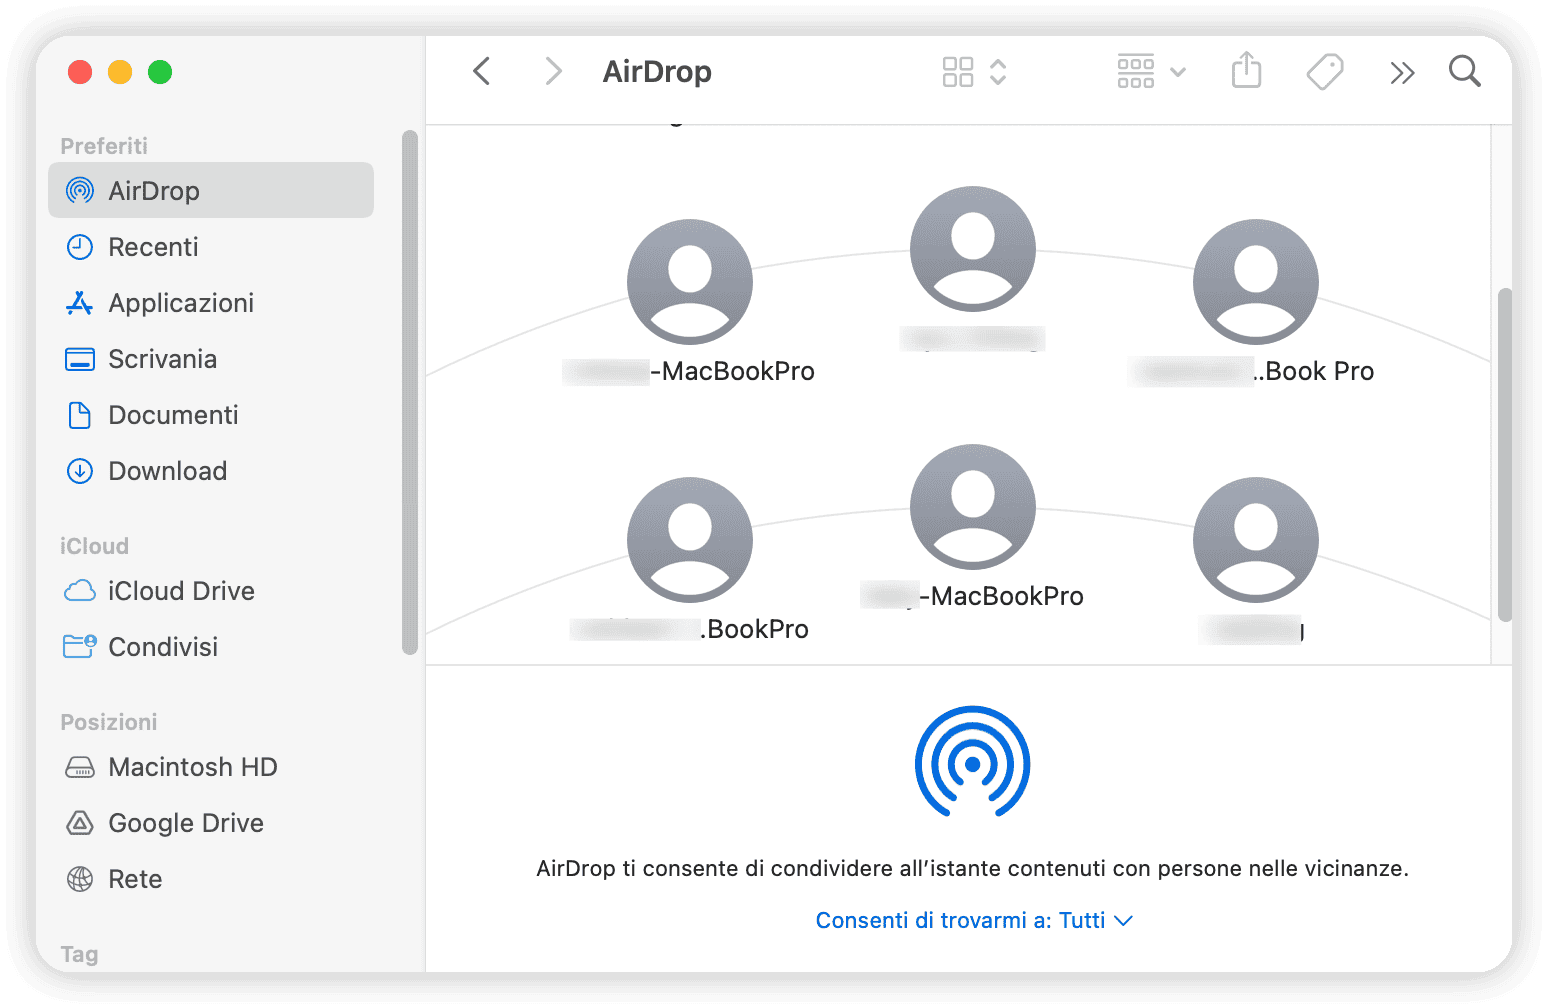 enable AirDrop correctly